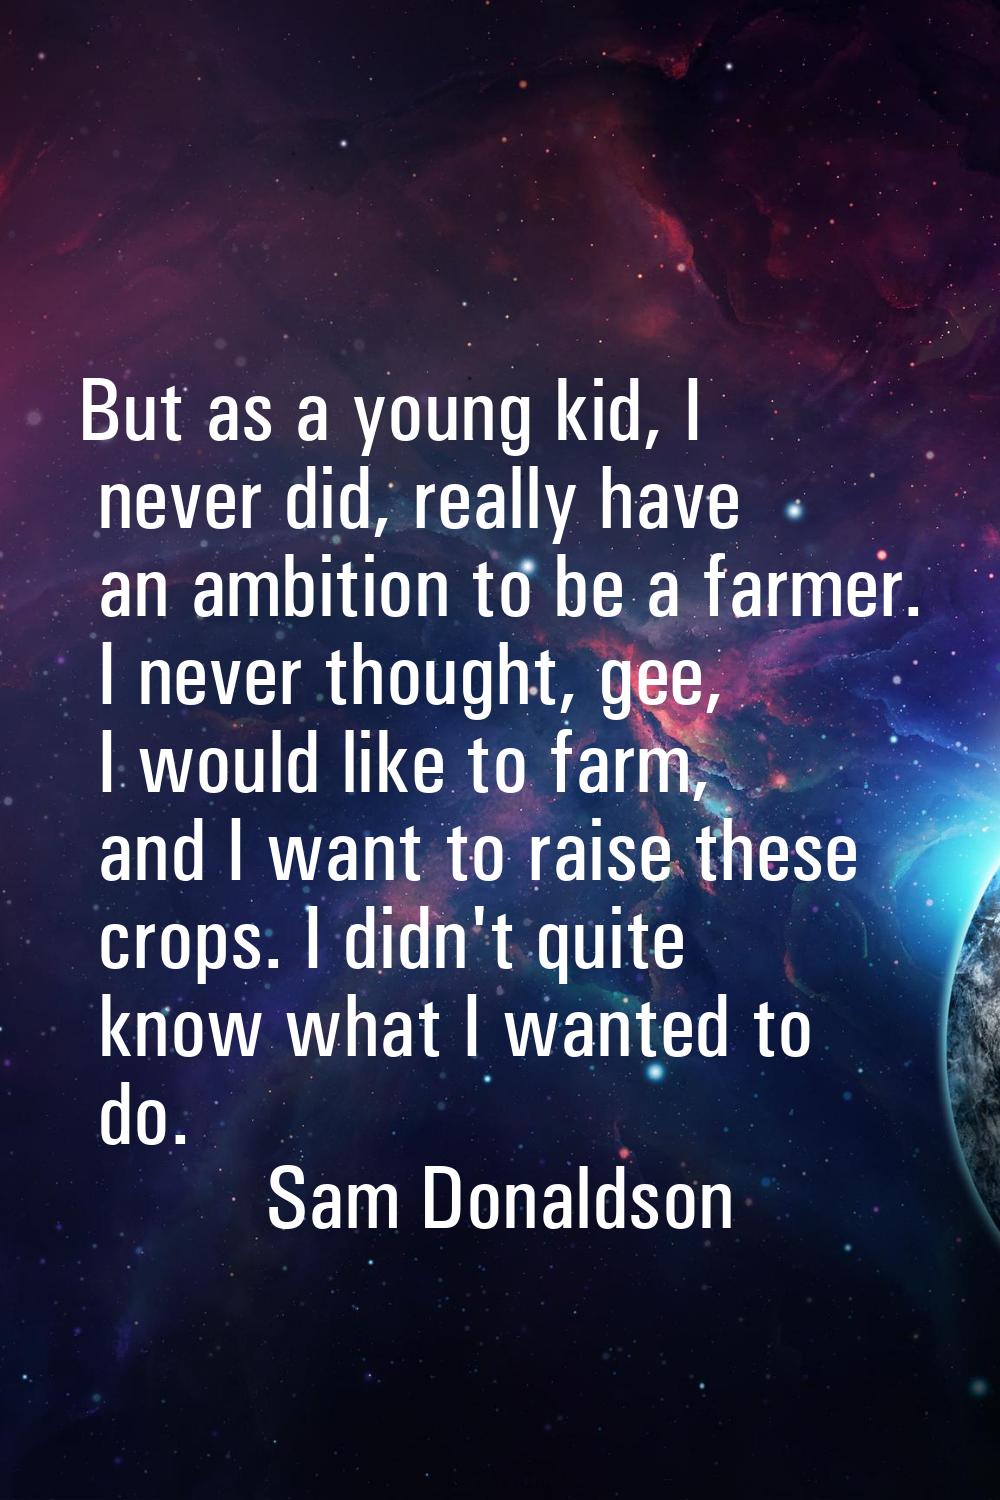 But as a young kid, I never did, really have an ambition to be a farmer. I never thought, gee, I wo